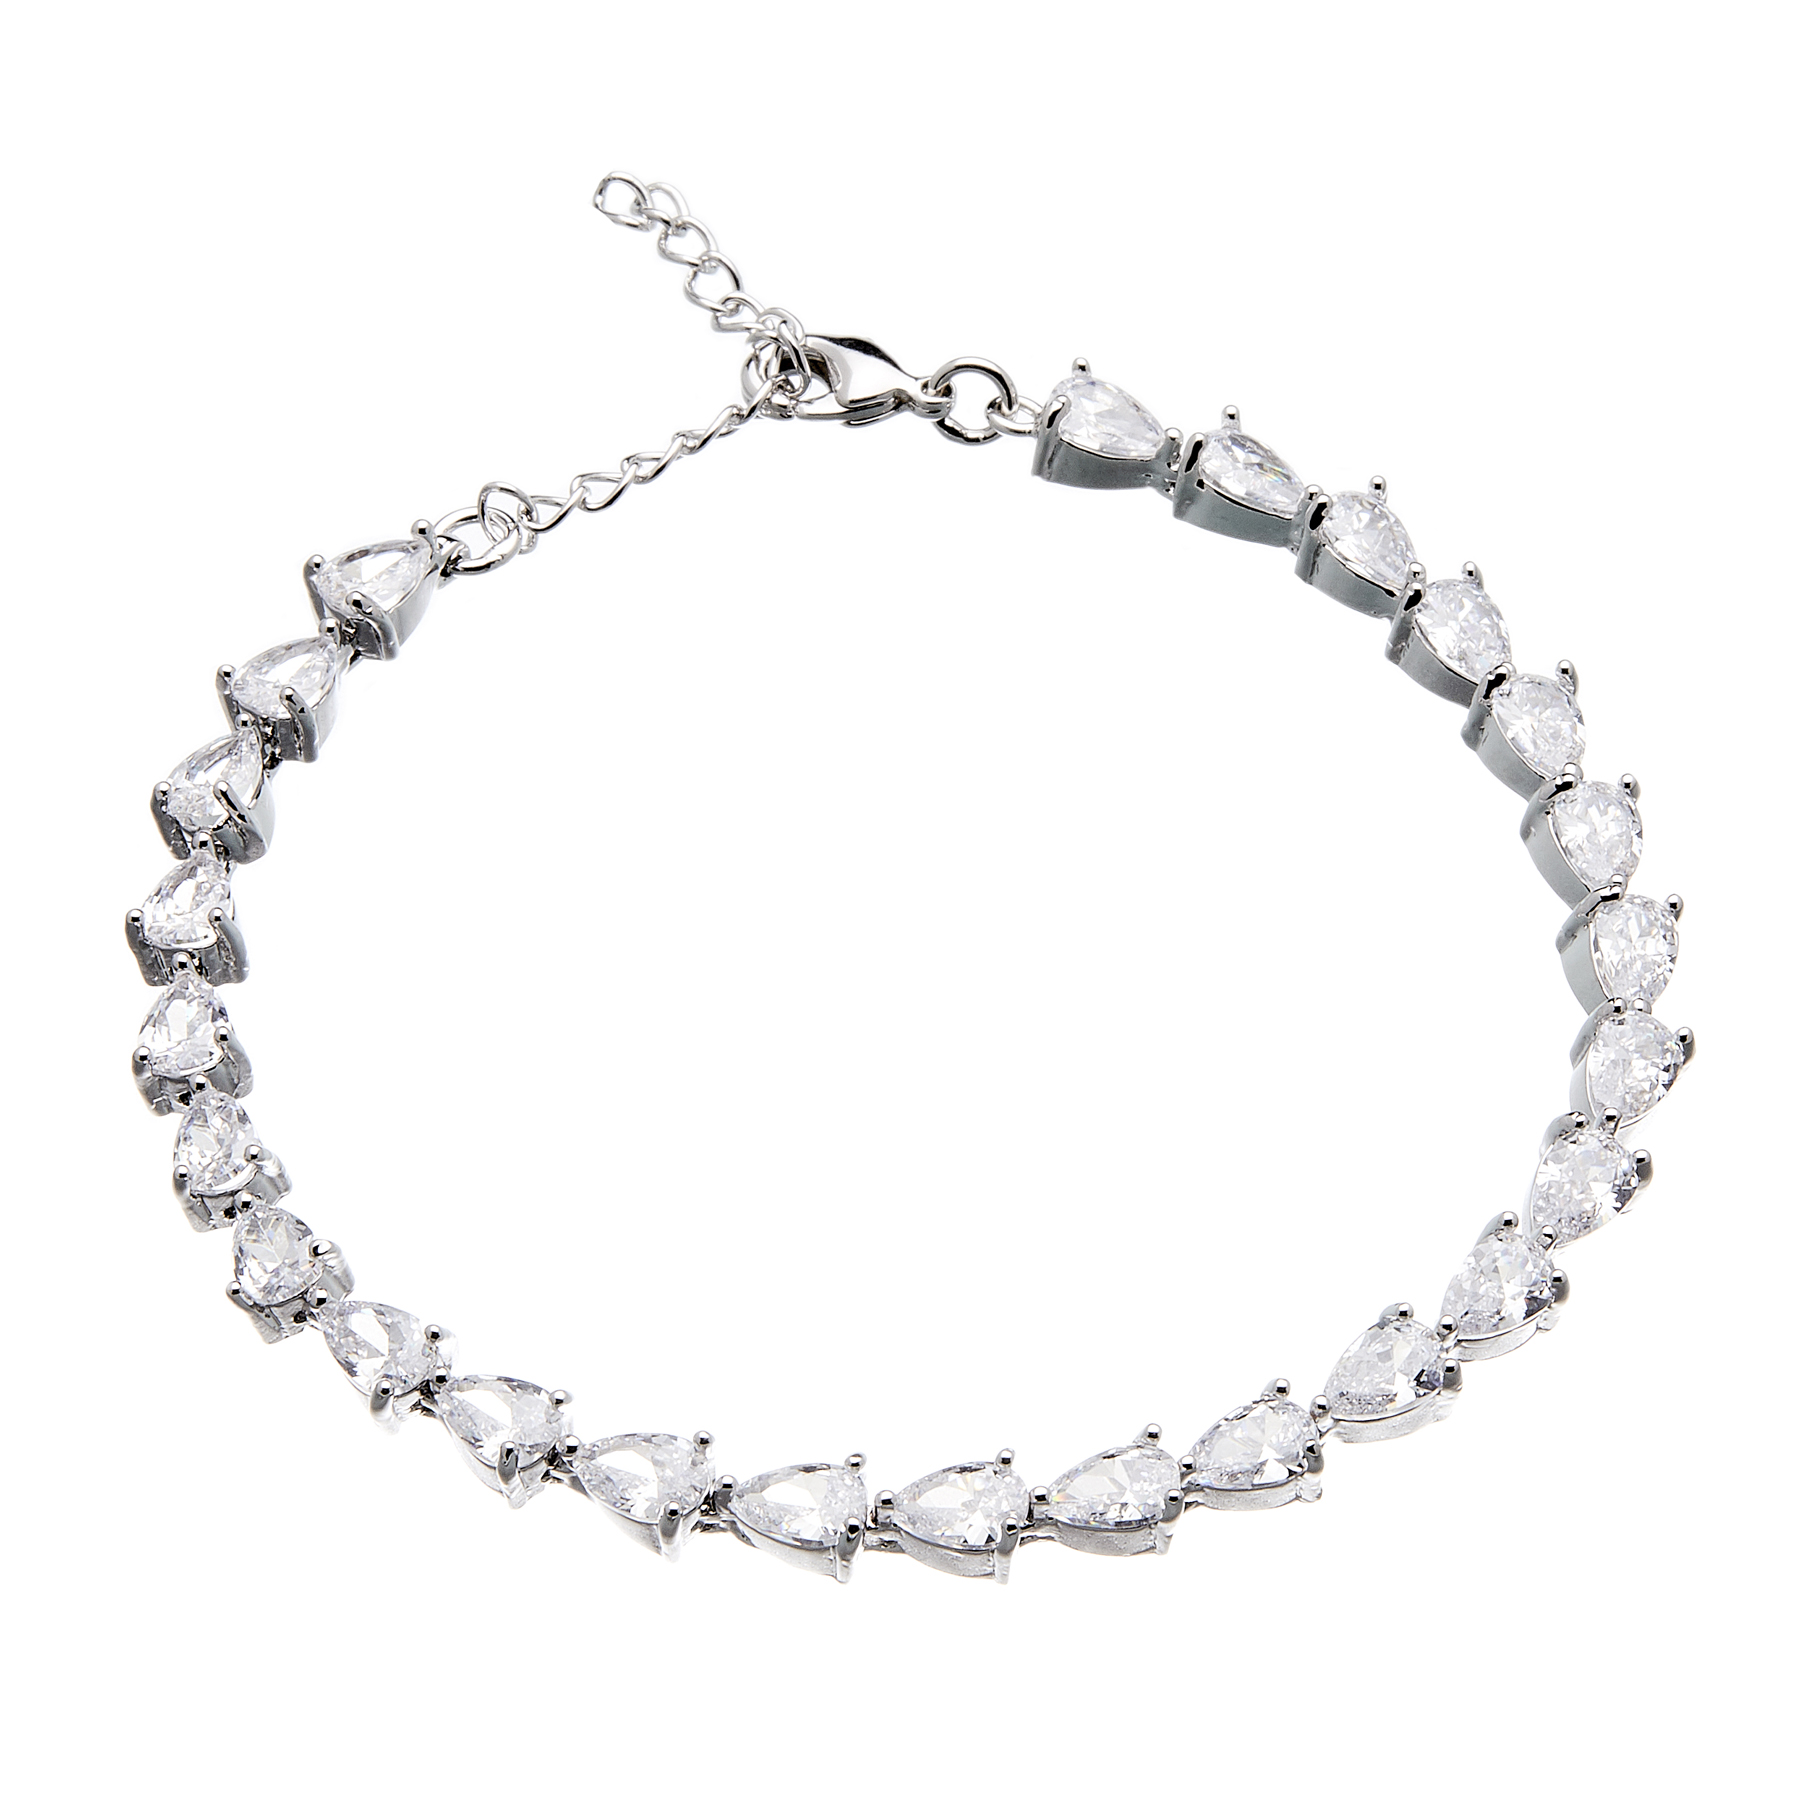 Silver Tennis Bracelet - lobster clasp with sparkling Cubic Zirconia Stones - Naia